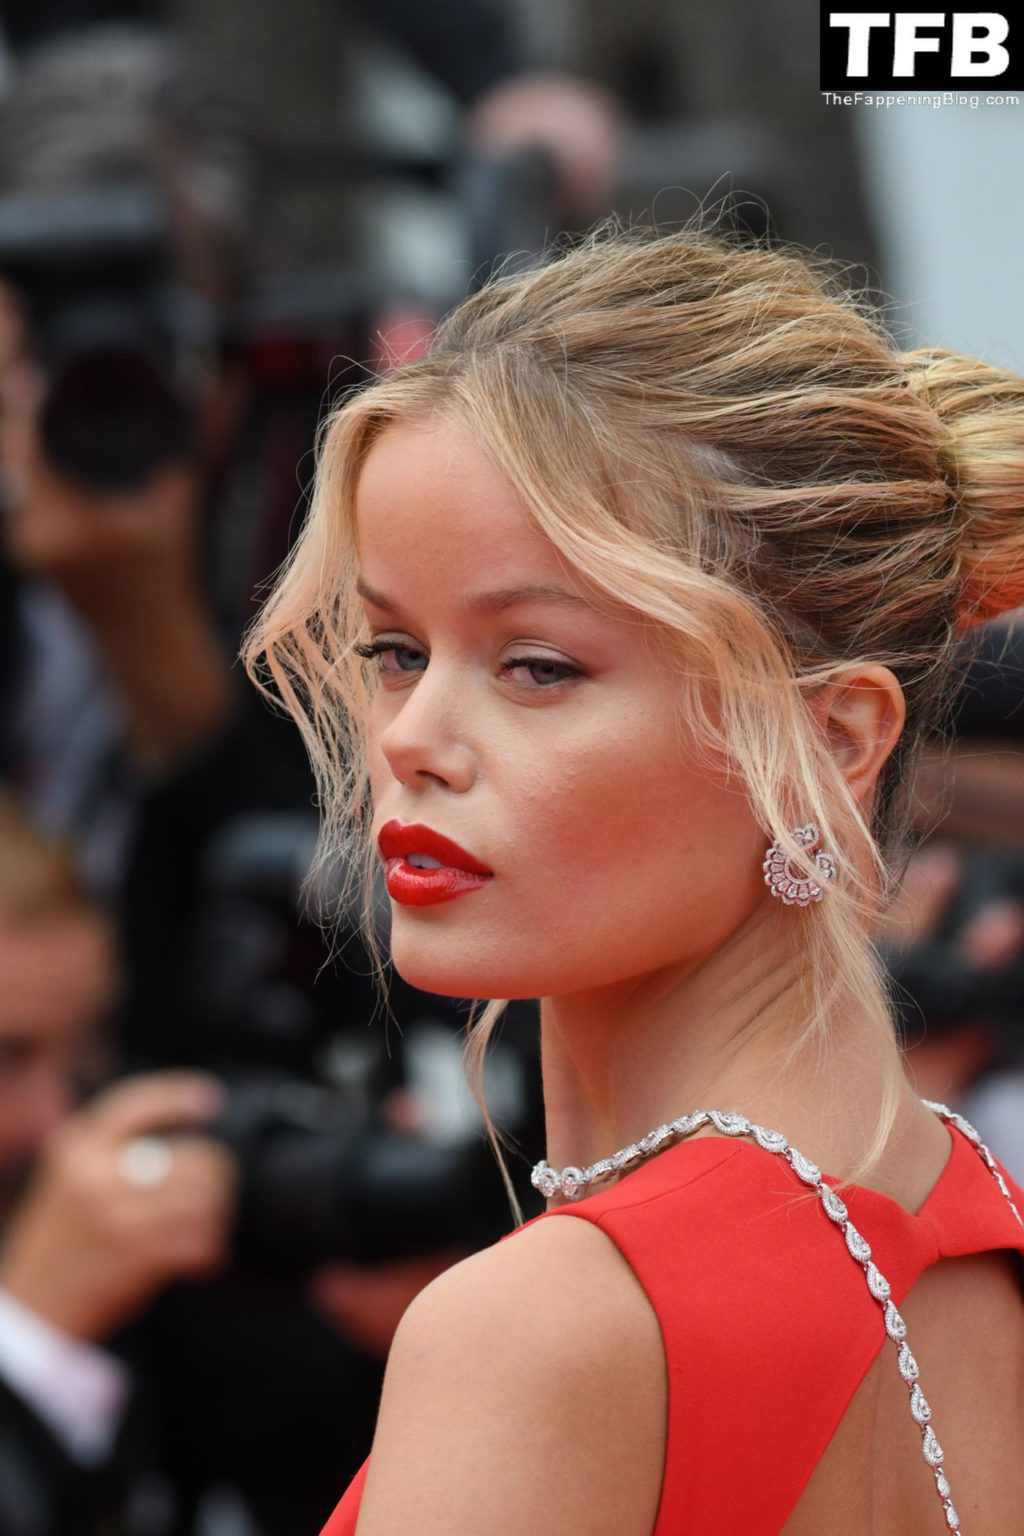 Frida Aasen Sexy The Fappening Blog 138 1024x1536 - Frida Aasen Looks Stunning in a Red Dress at the 75th Annual Cannes Film Festival (153 Photos)